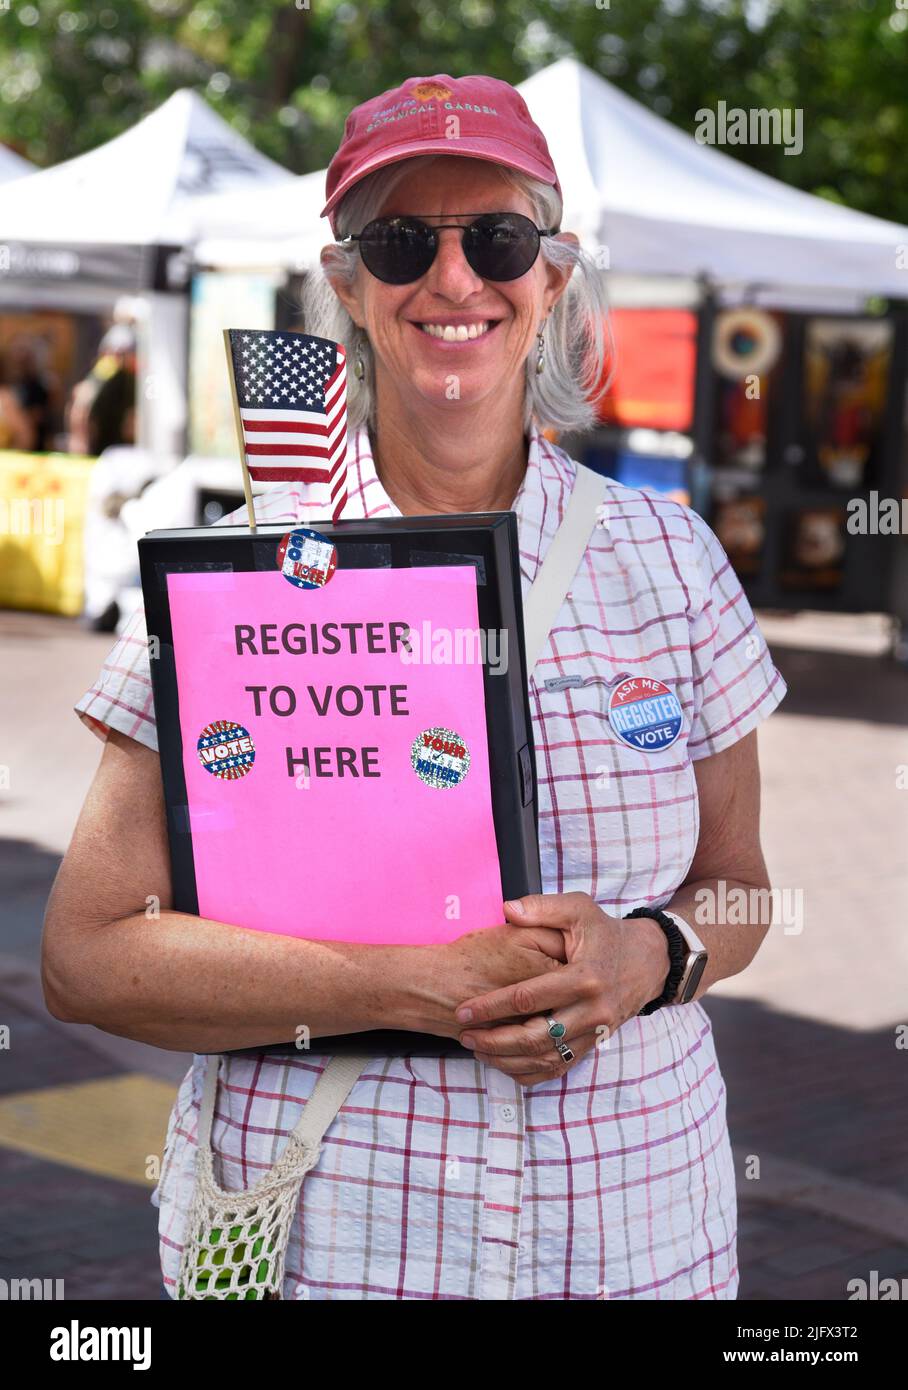 A volunteer at a Fourth of July holiday event in Santa Fe, New Mexico, registers citizens to vote in upcoming U.S. elections. Stock Photo